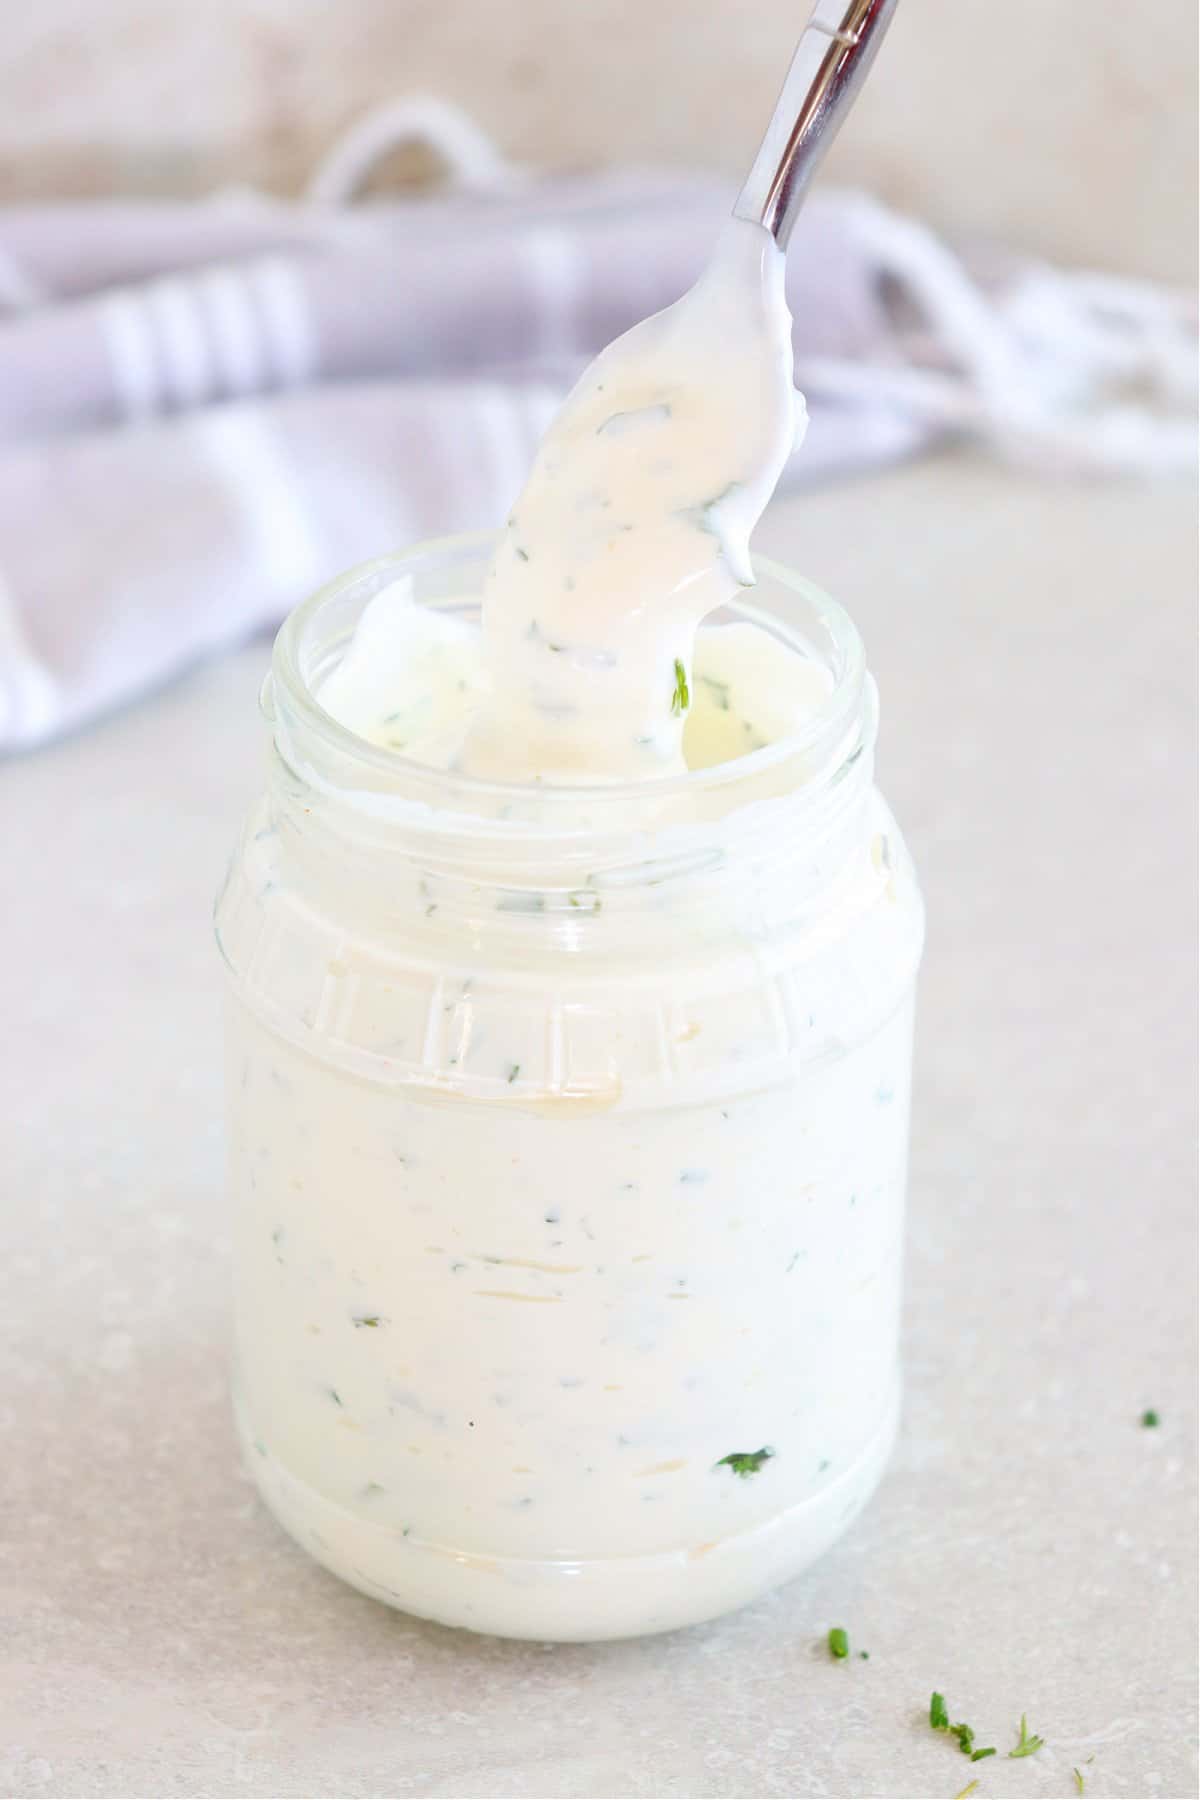 Ranch dressing in a glass jar with spoon.